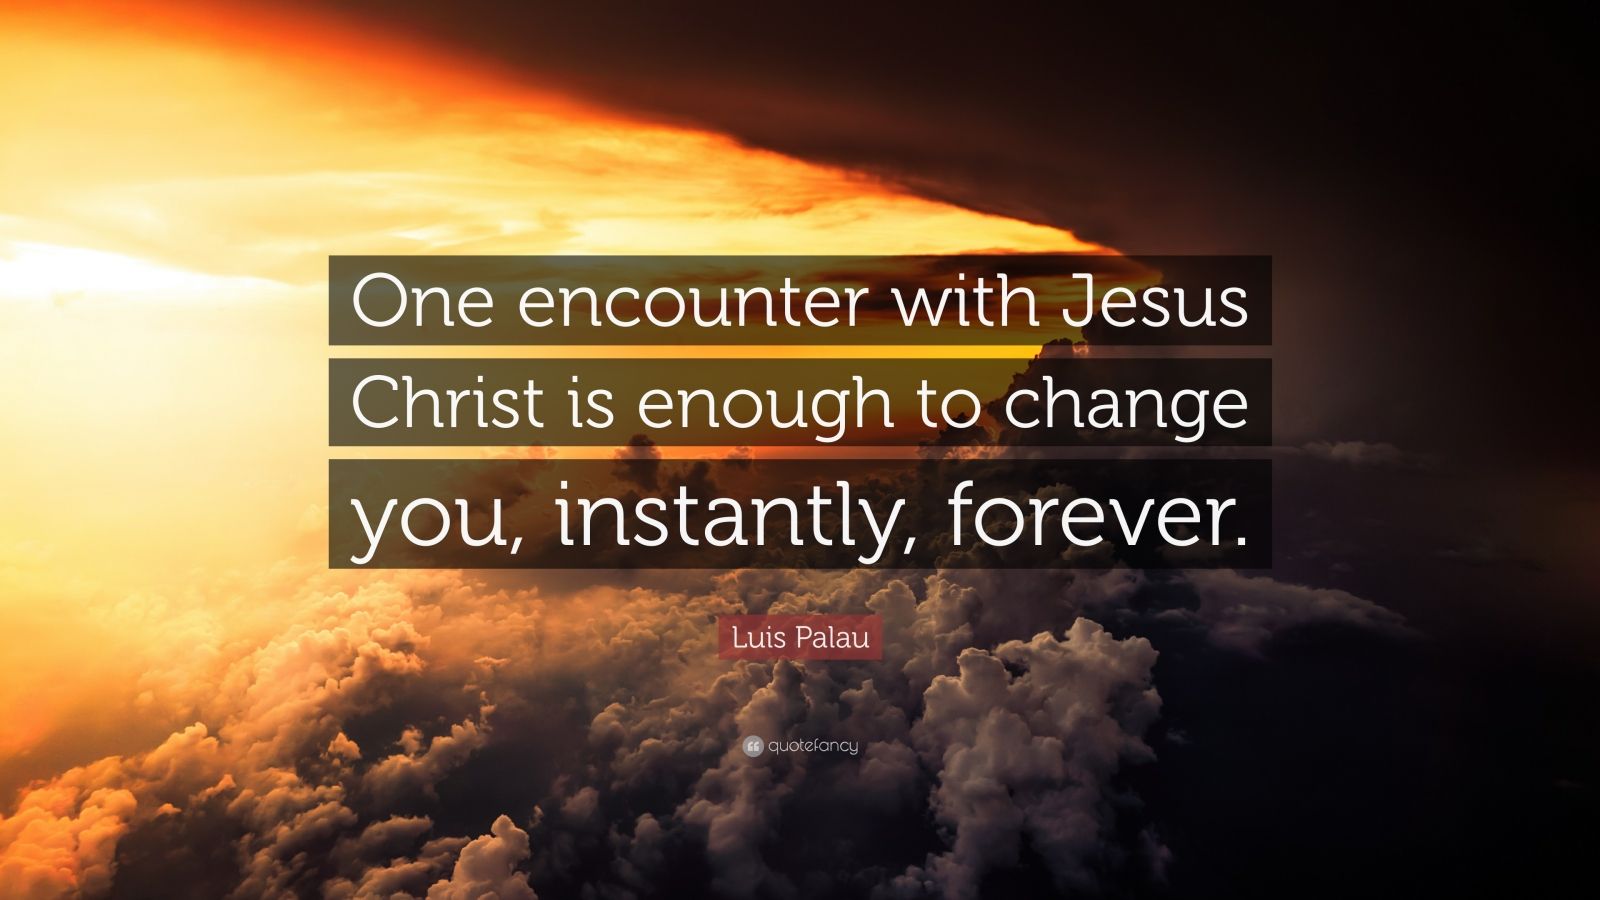 Luis Palau Quote: “One encounter with Jesus Christ is enough to change ...